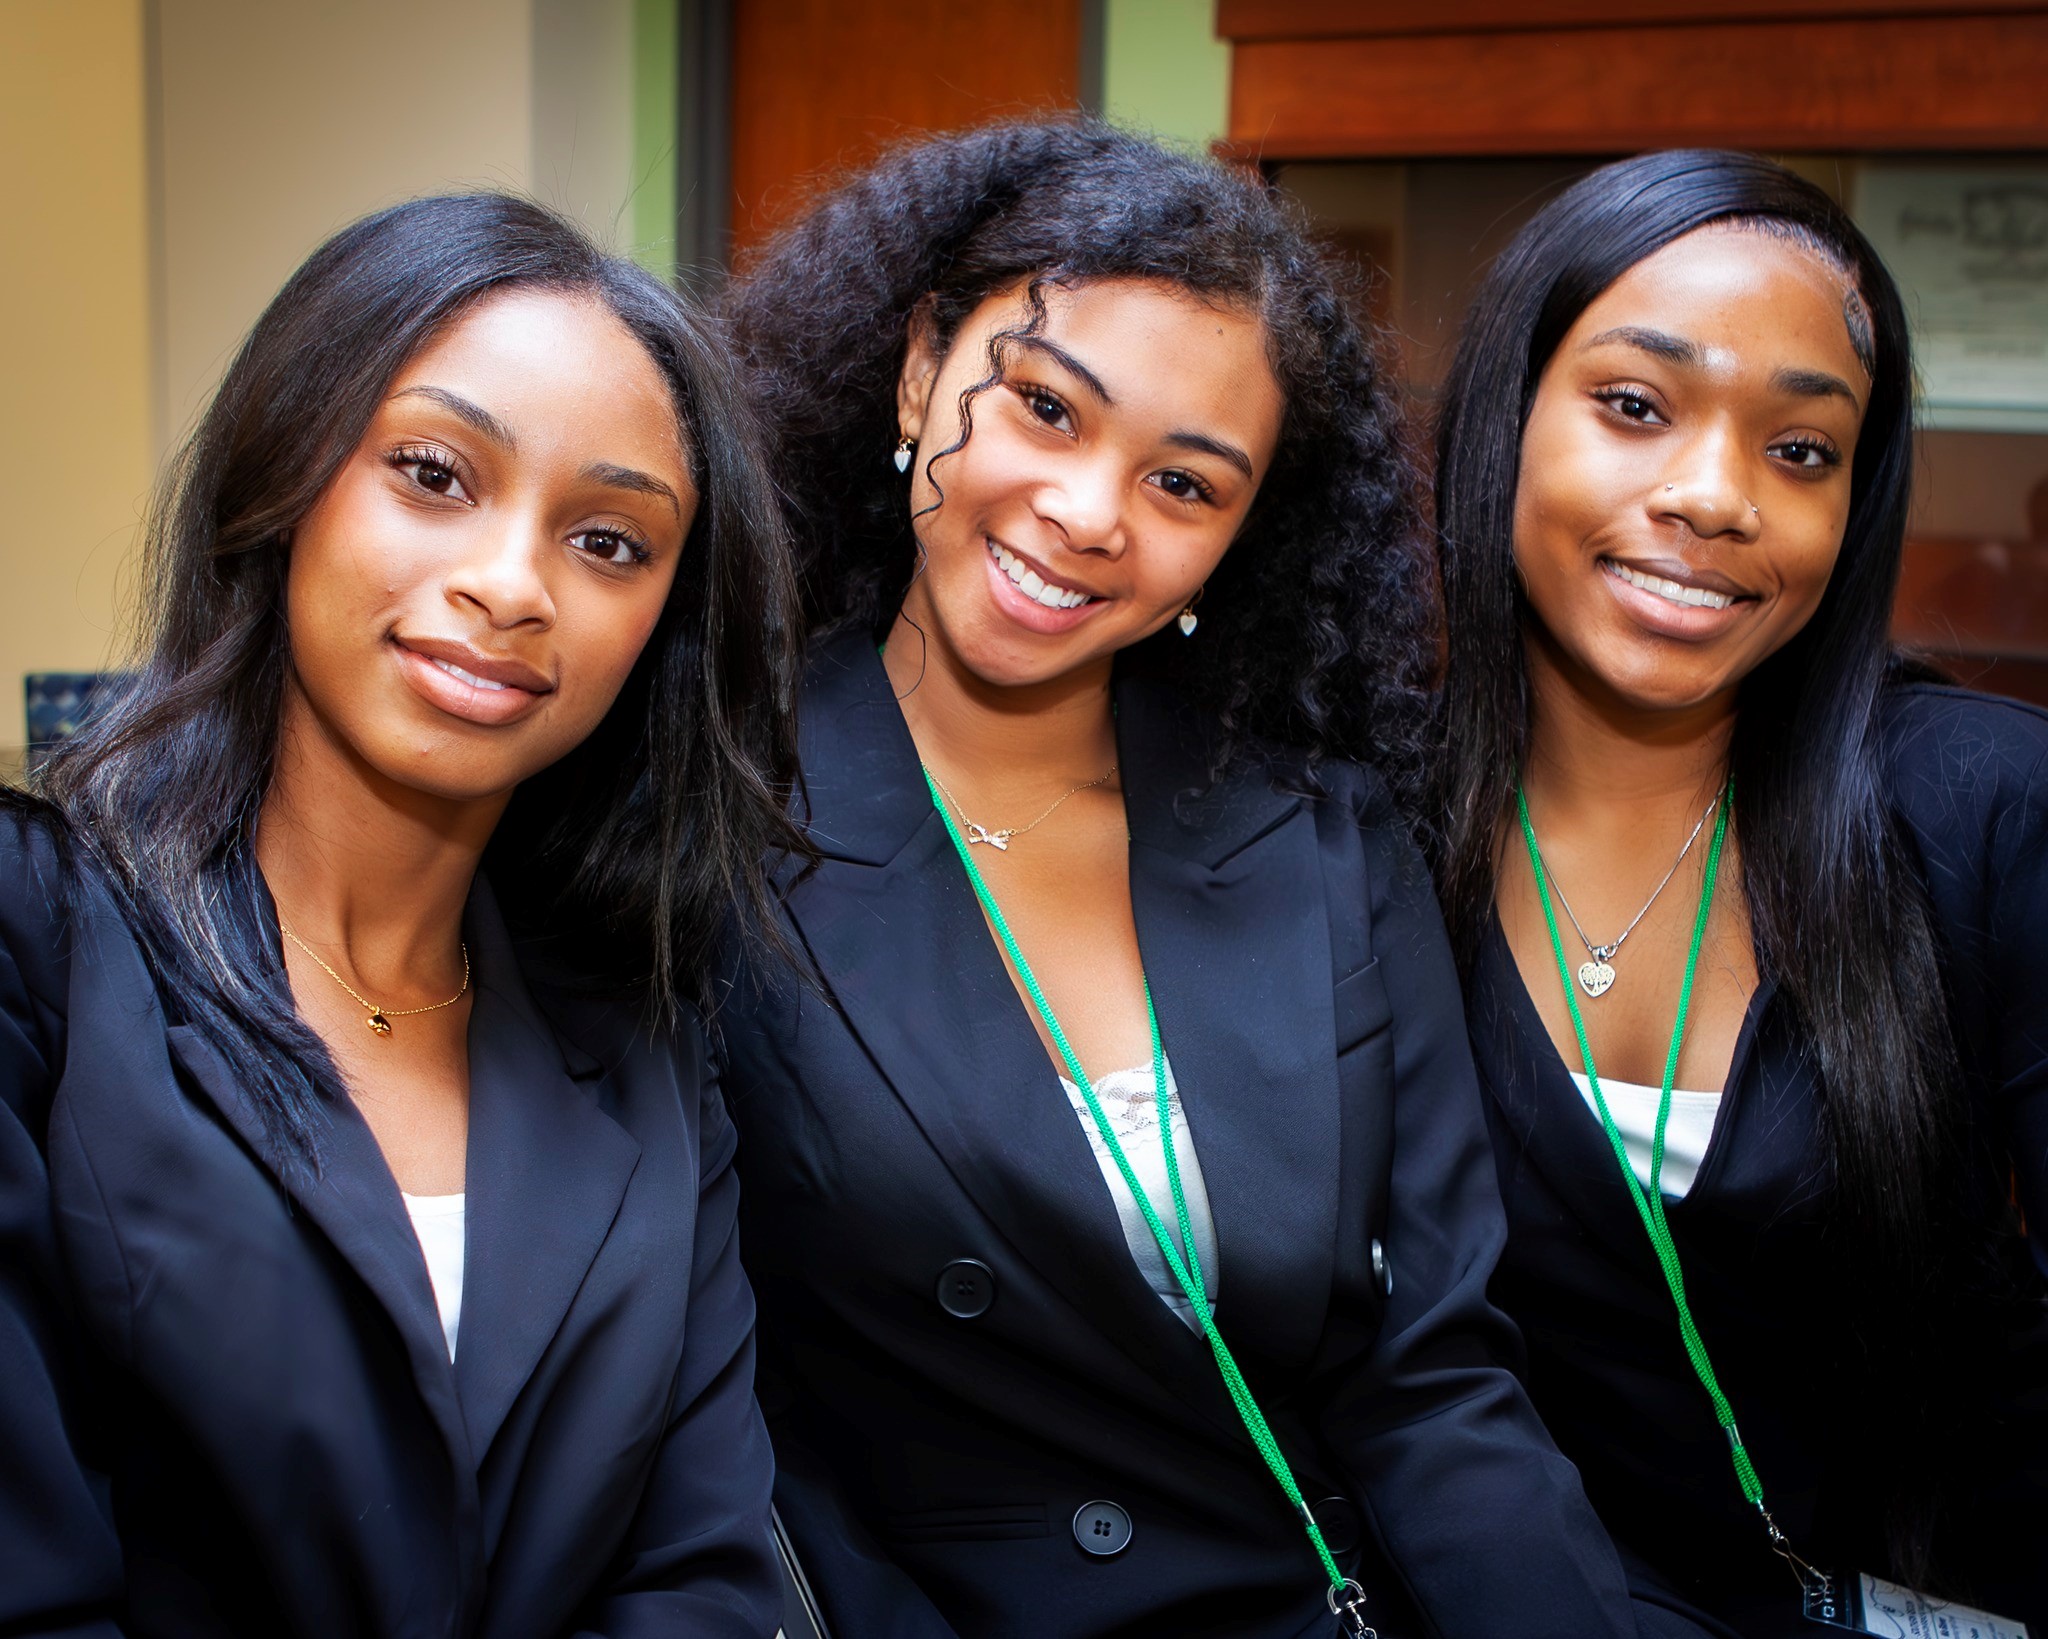 Three female students wearing blazers smile for the photo